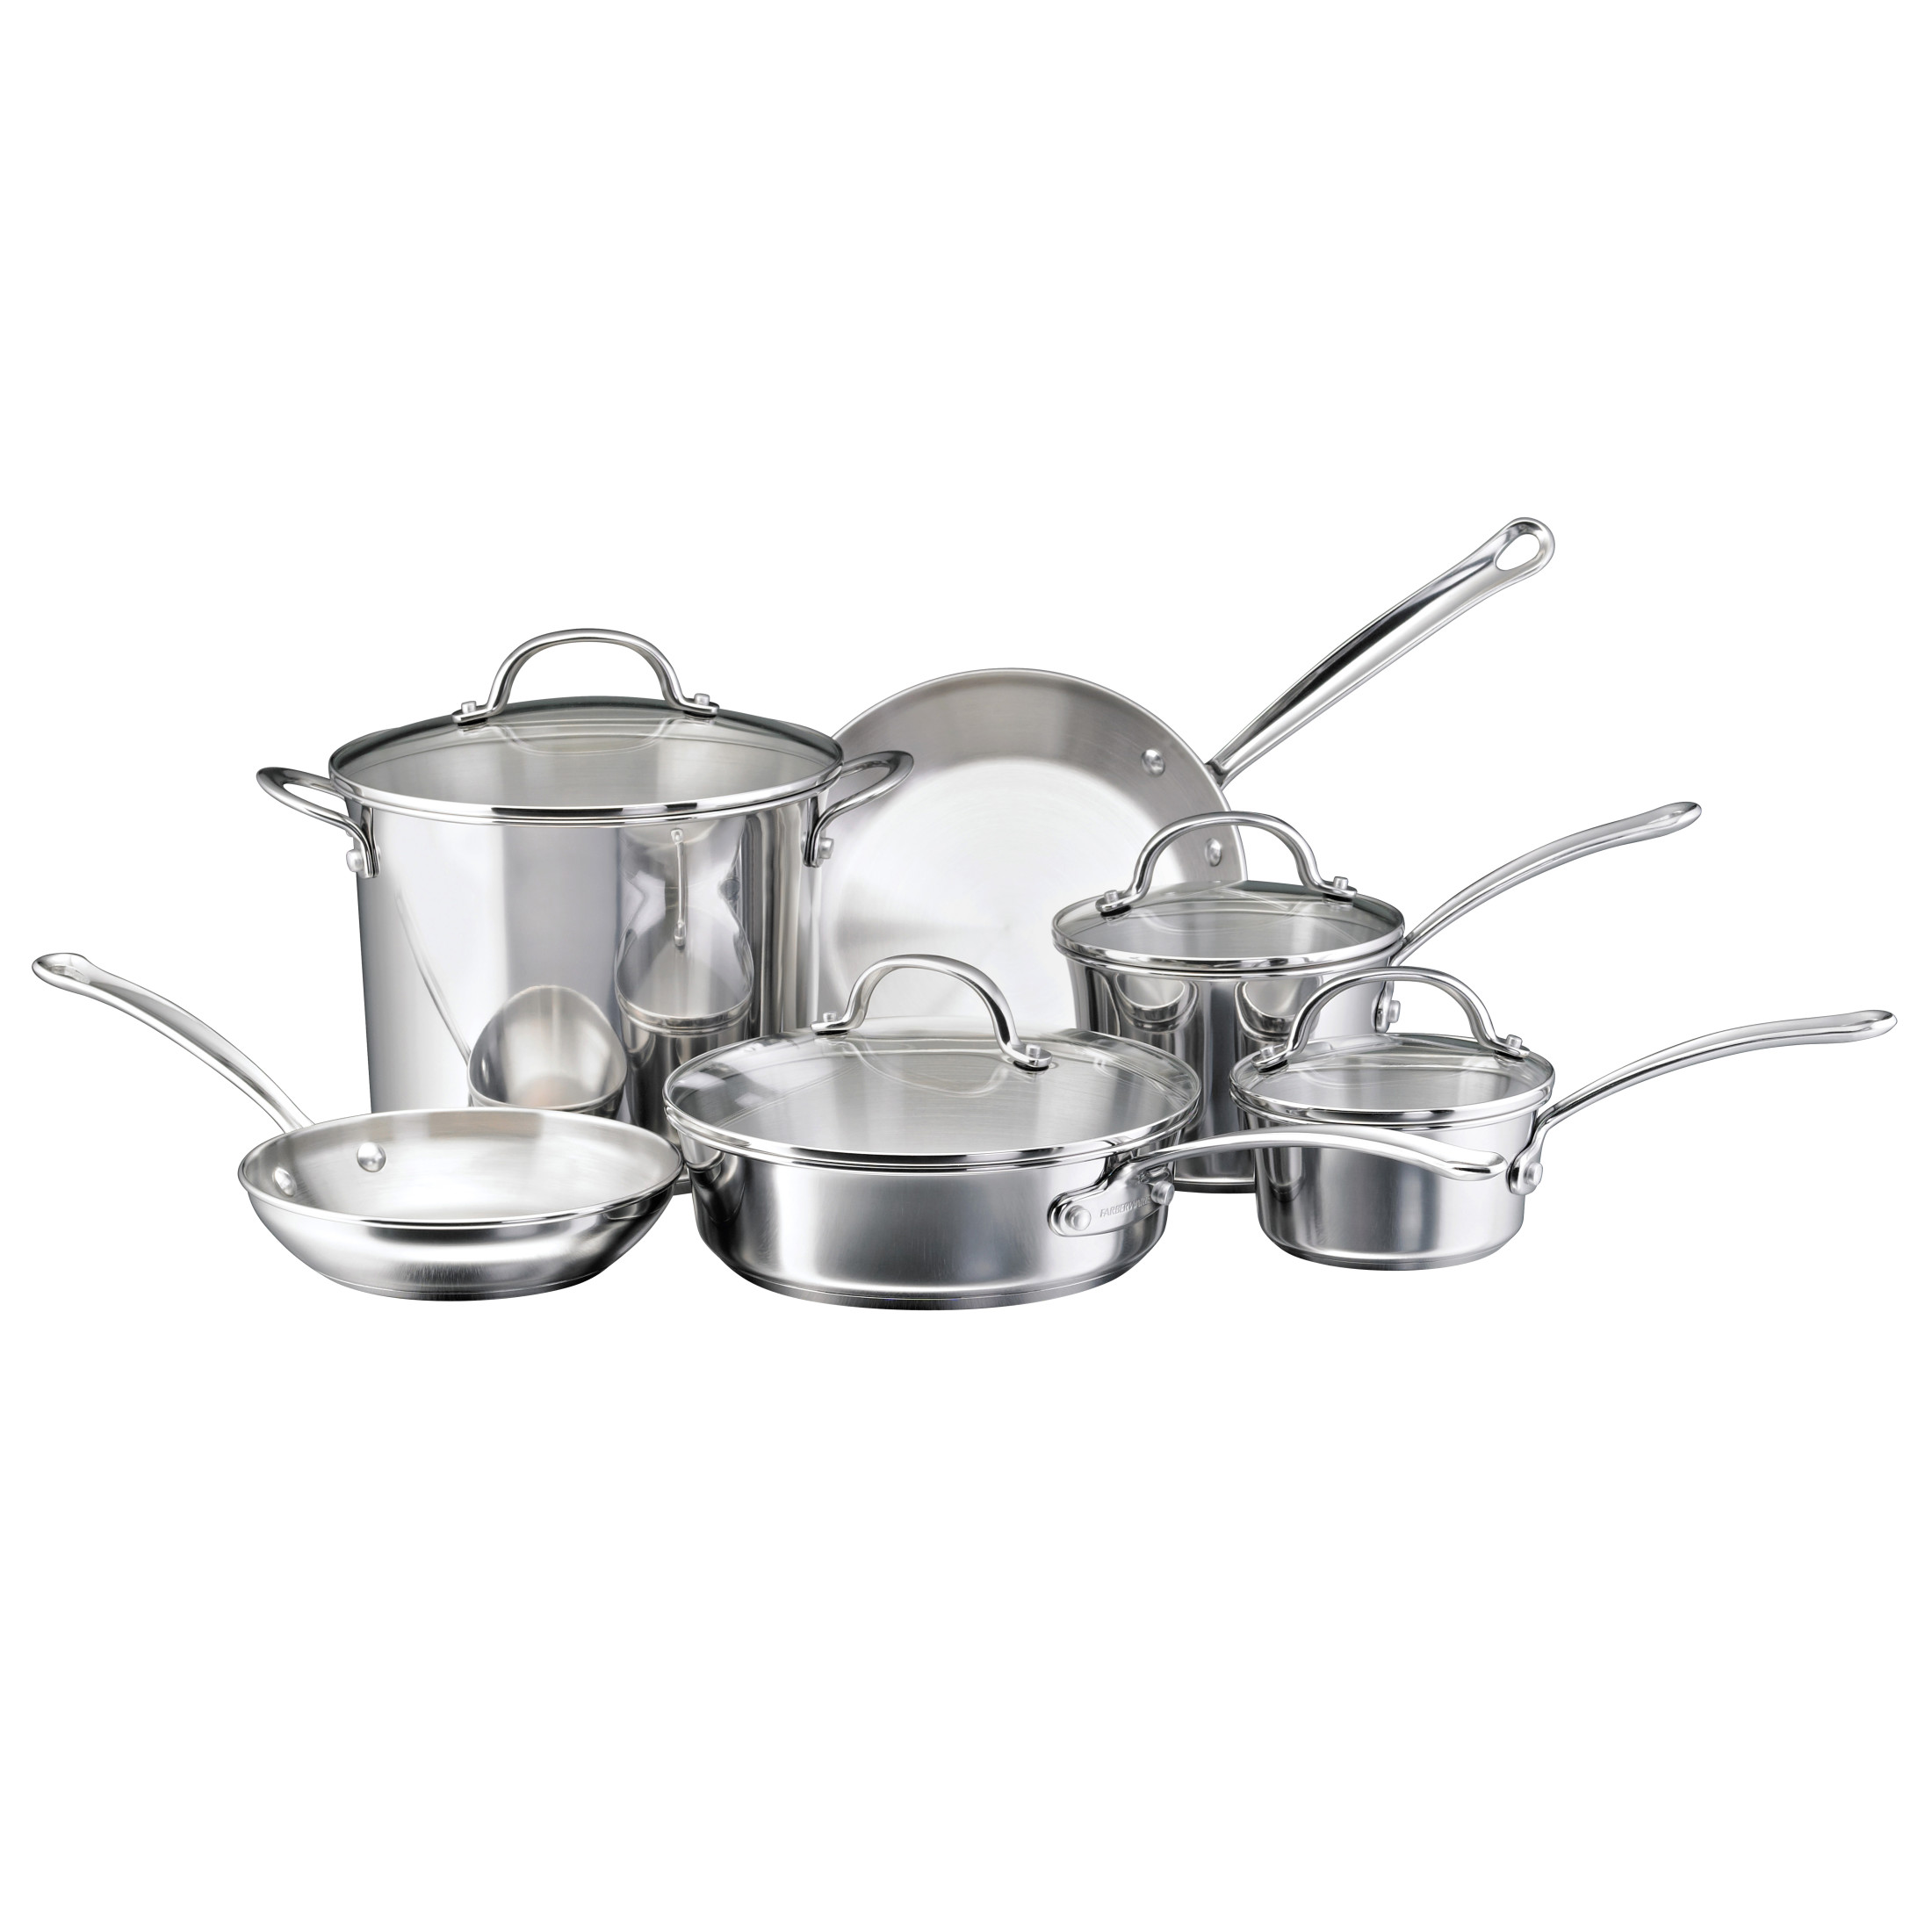 Farberware Millennium 10 Piece Stainless Steel Pots and Pans, Silver - image 1 of 11